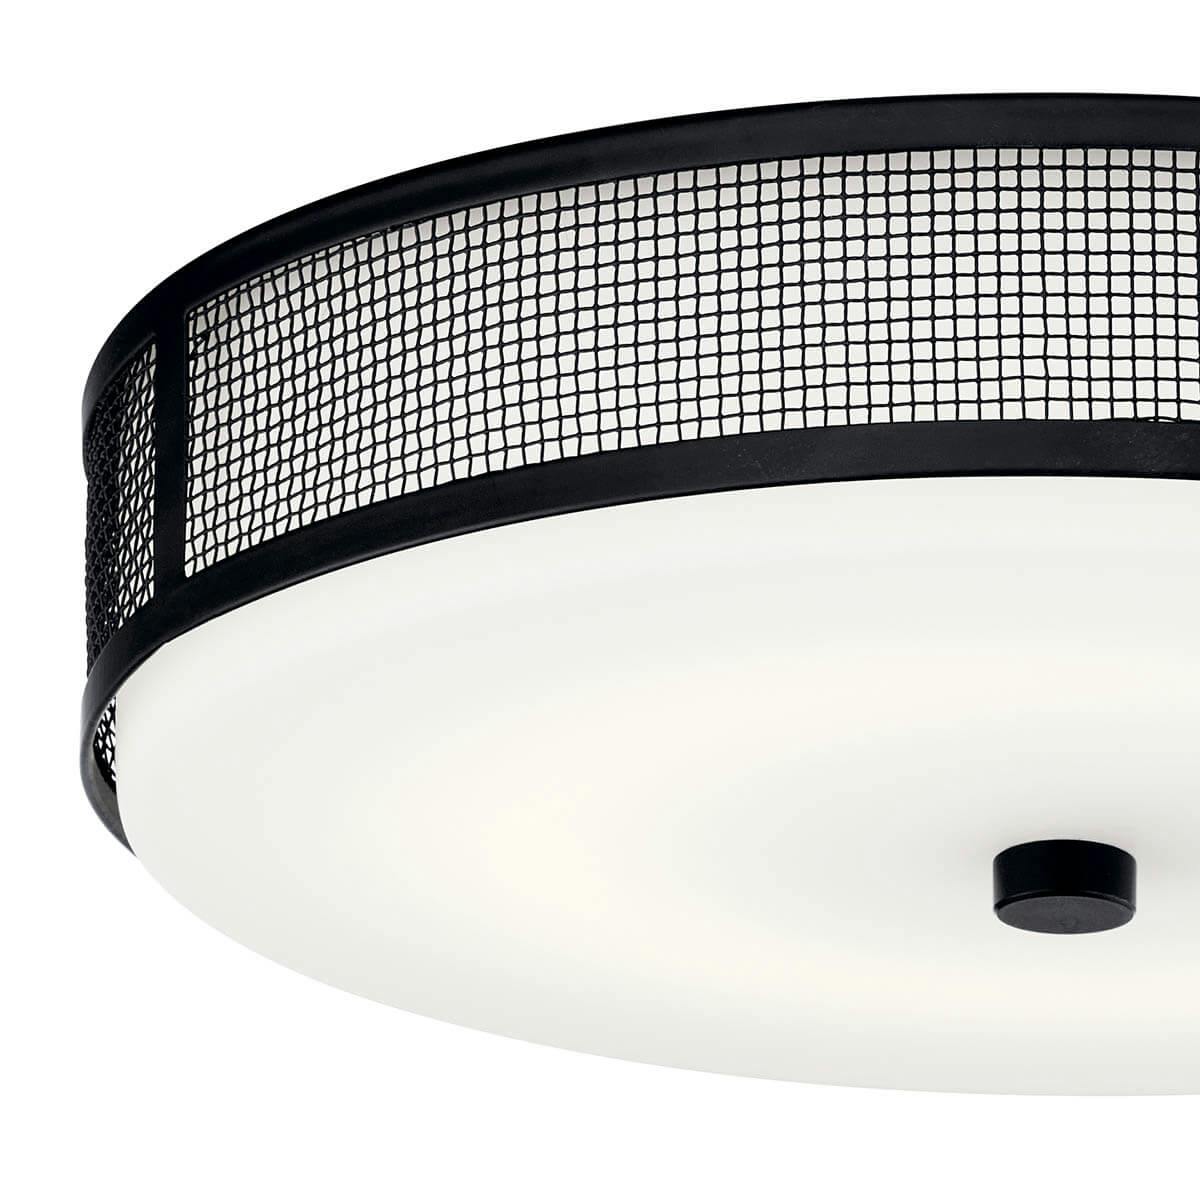 Ceiling Space Flush Mount Black on a white background